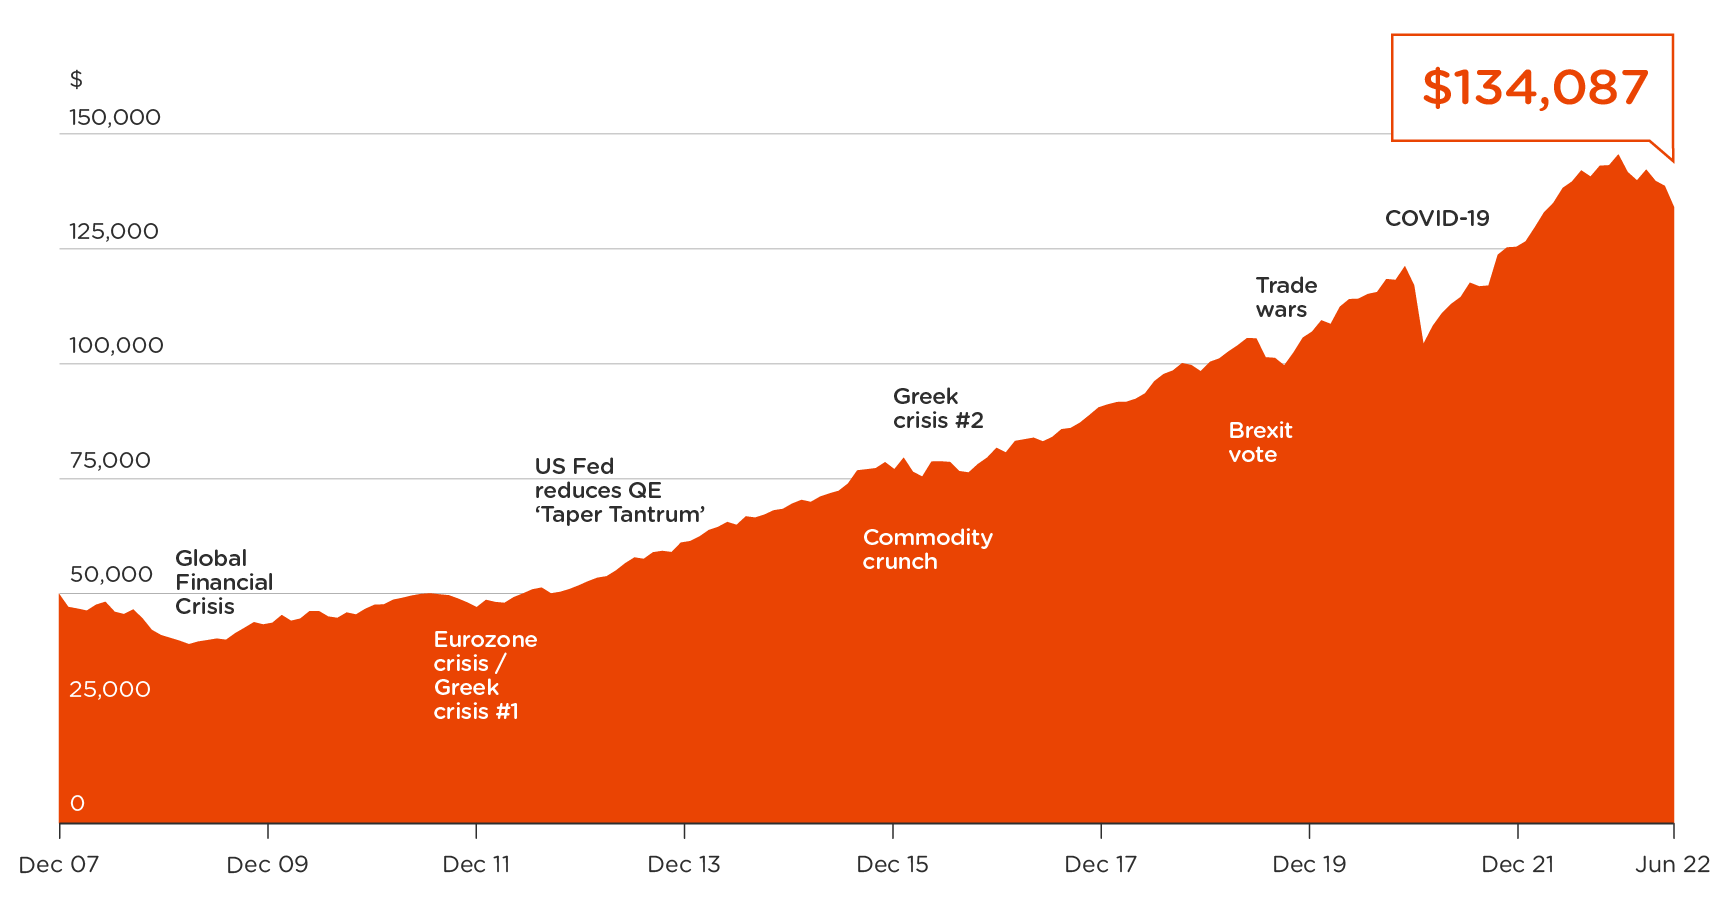 An area chart showing the growth of $50,000 invested in the Balanced option in January 2008 to $134,087 as at 30 June 2022.